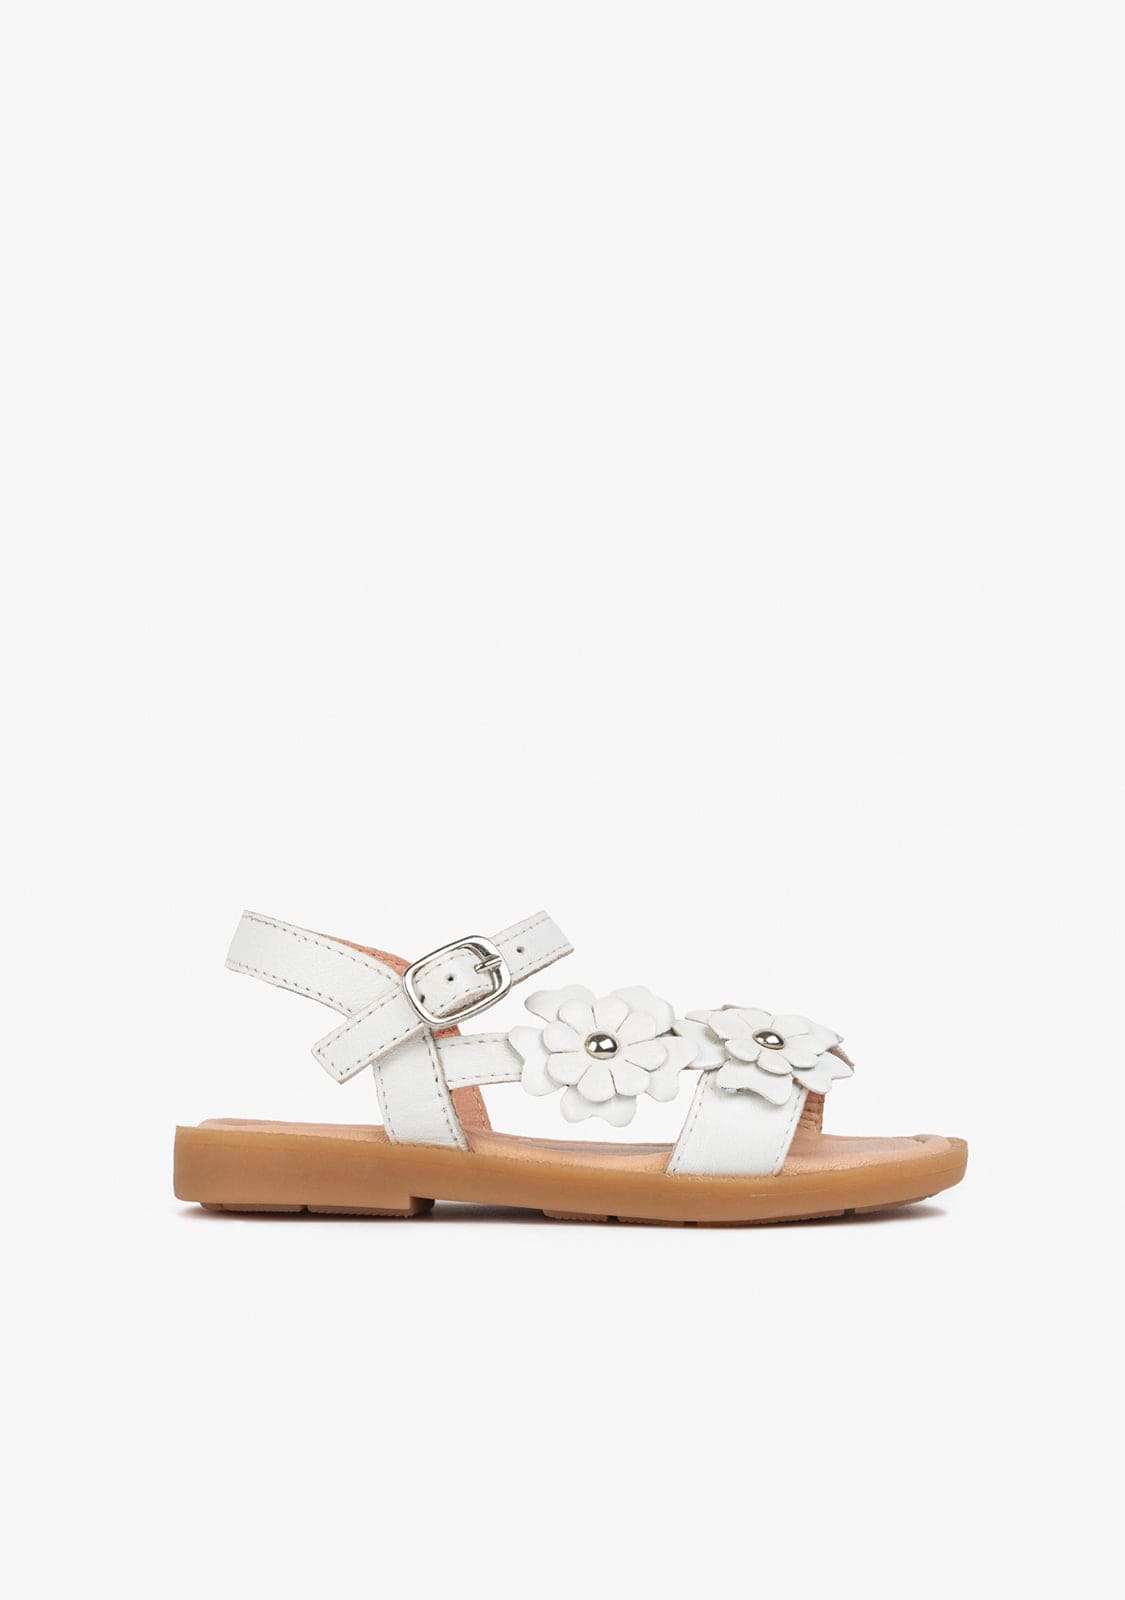 CONGUITOS Shoes Girl's Daisy White Leather Sandals